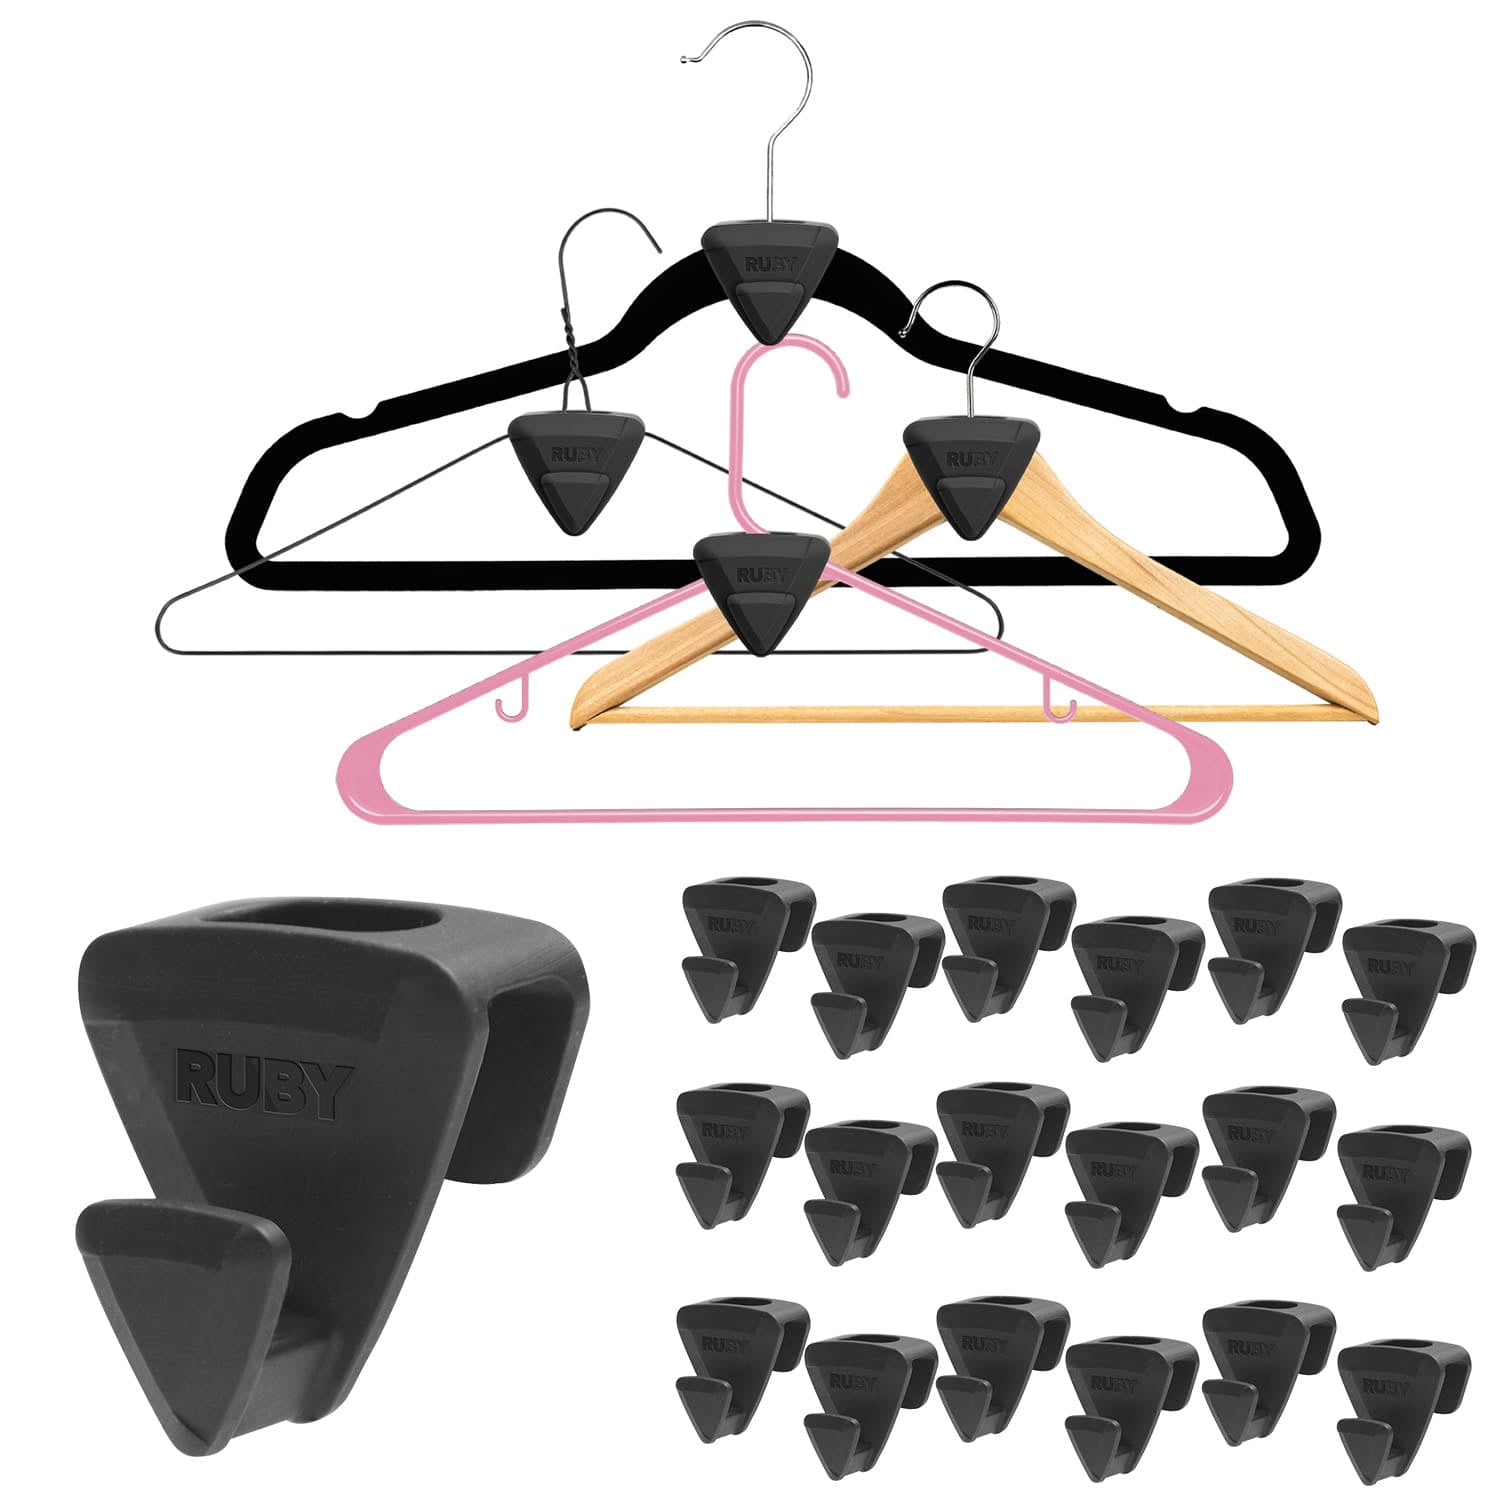 Original As Seen On TV Ruby Space Triangles, Cascade Hangers to Create Up  to 3X More Closet Space 